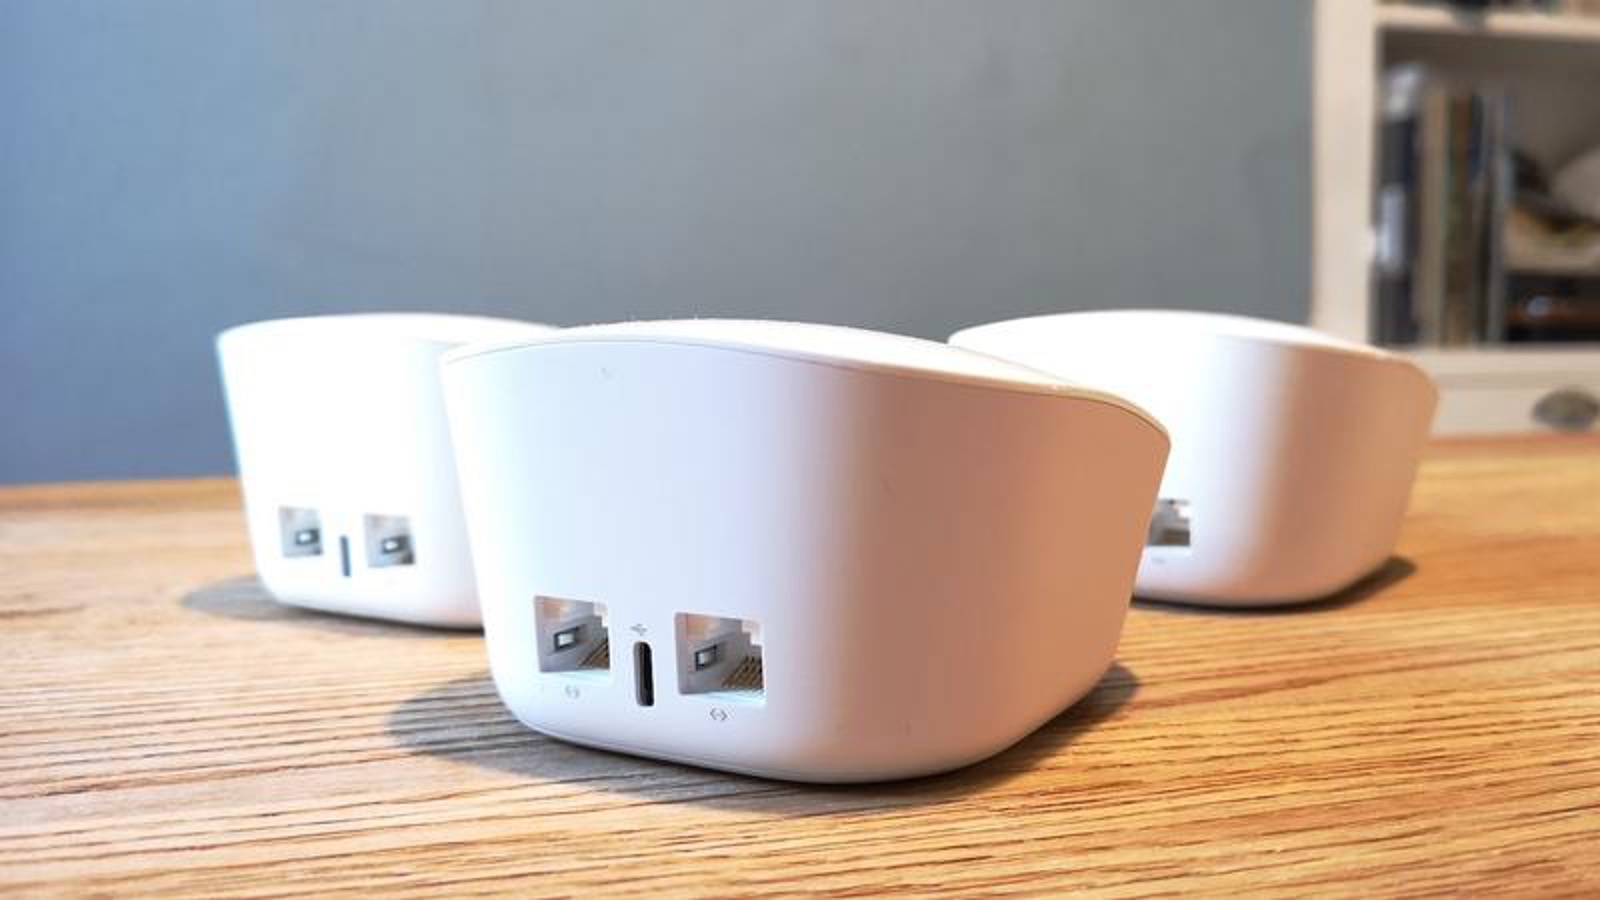 What Is The Amazon Eero Mesh Wi-Fi System